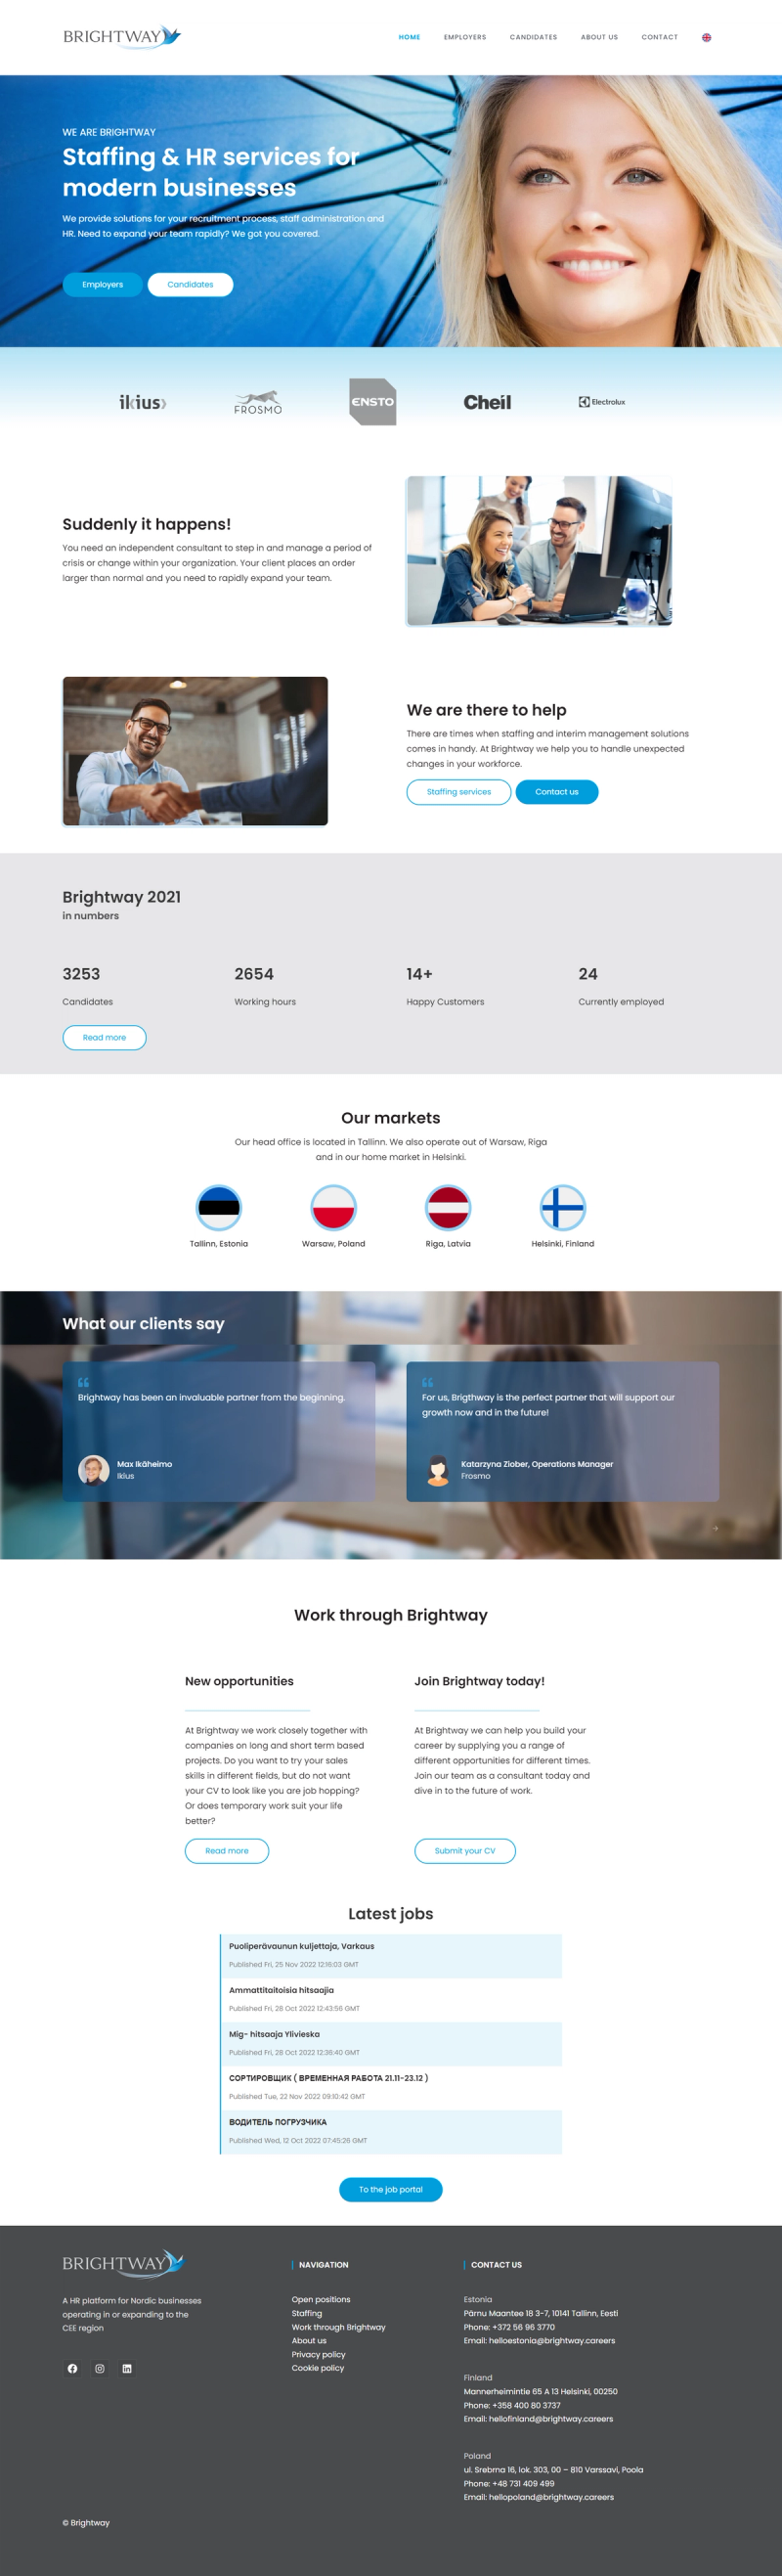 brightway careers home page